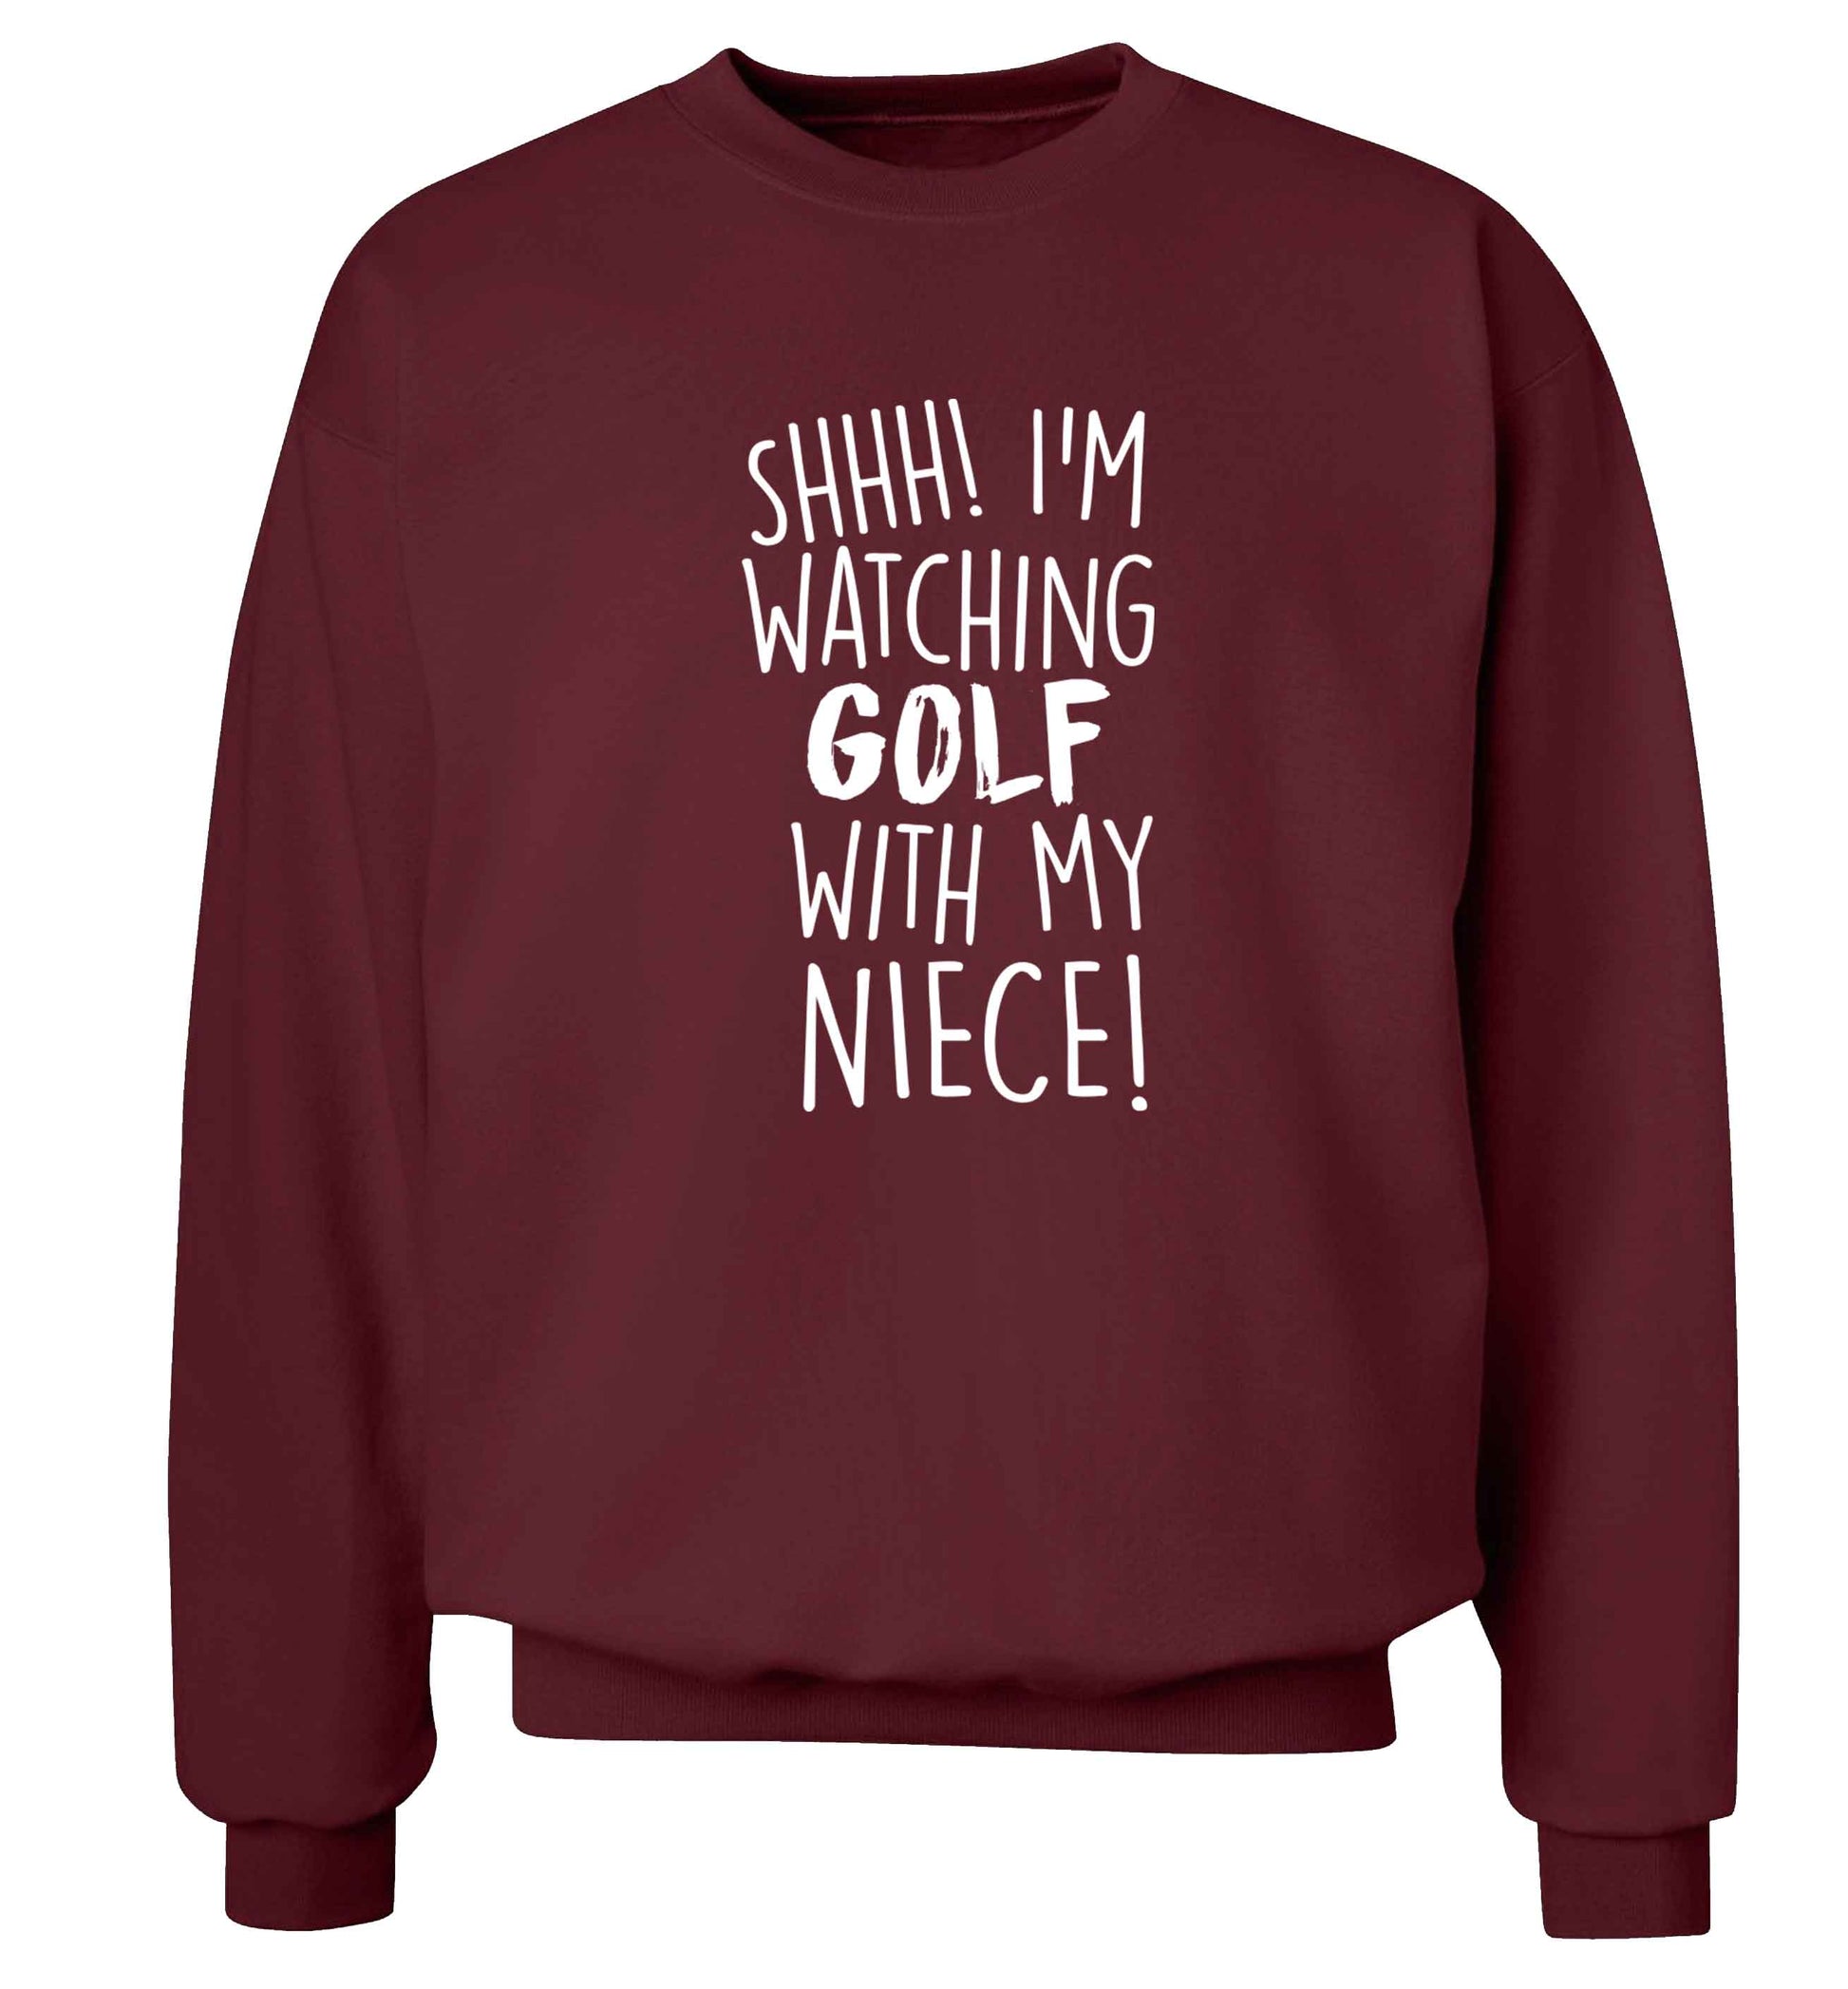 Shh I'm watching golf with my niece Adult's unisex maroon Sweater 2XL